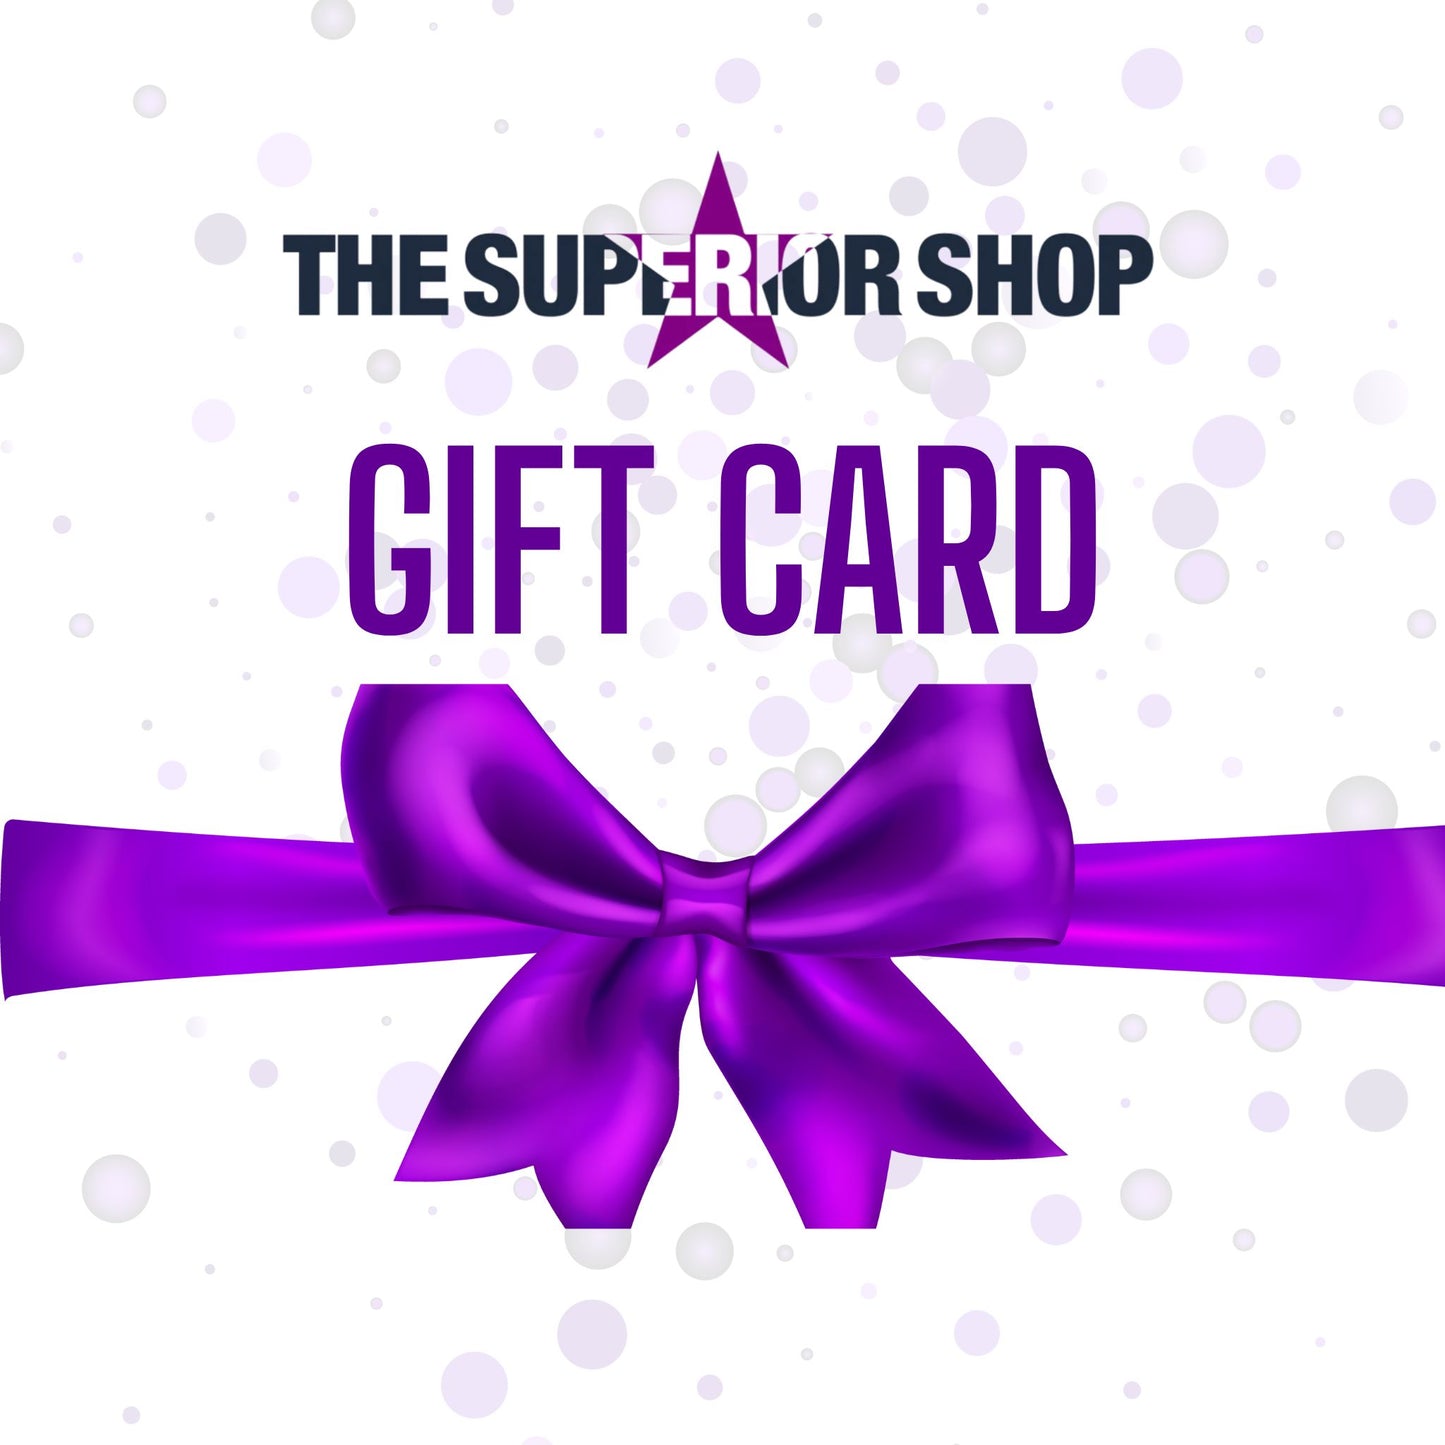 The Super Shop Gift Card